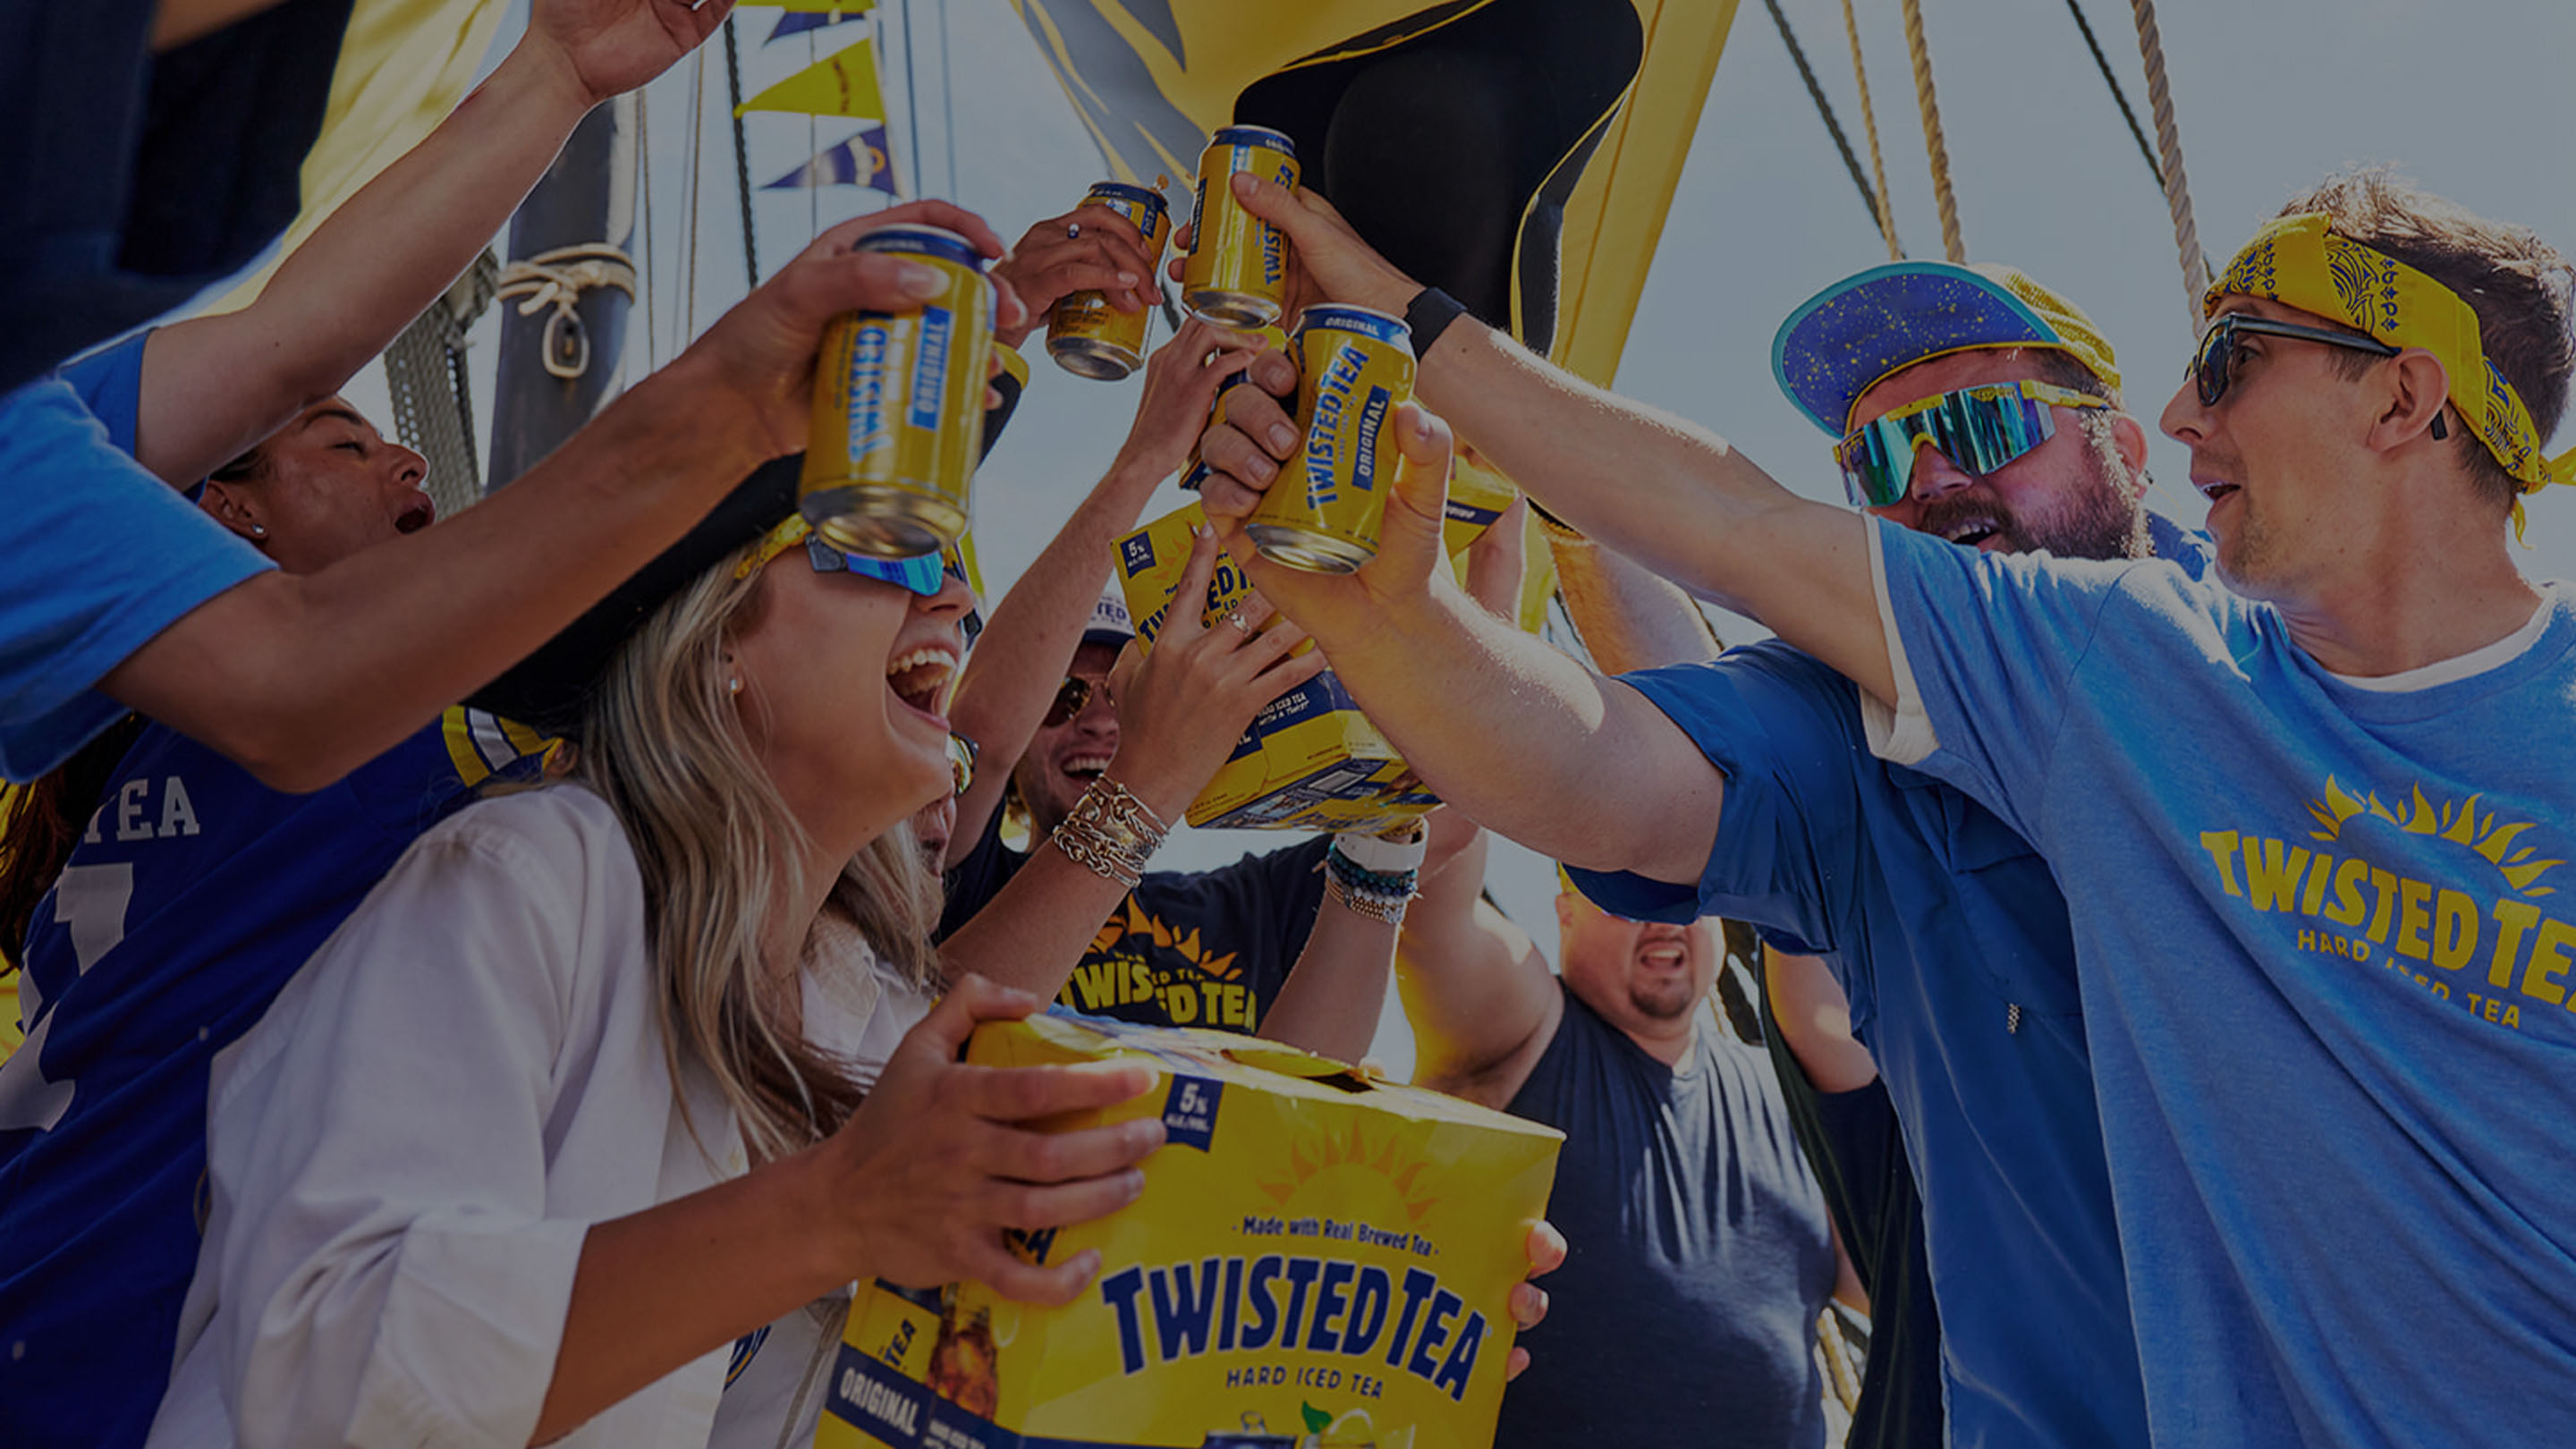 https://www.bostonbeer.com/-/media/images/primary-content/cta-images/boston-beer/twisted-tea-boston-tea-party.jpg?h=1620&w=2880&hash=4CB01E9897E4BCC48789341DC92BC6BB